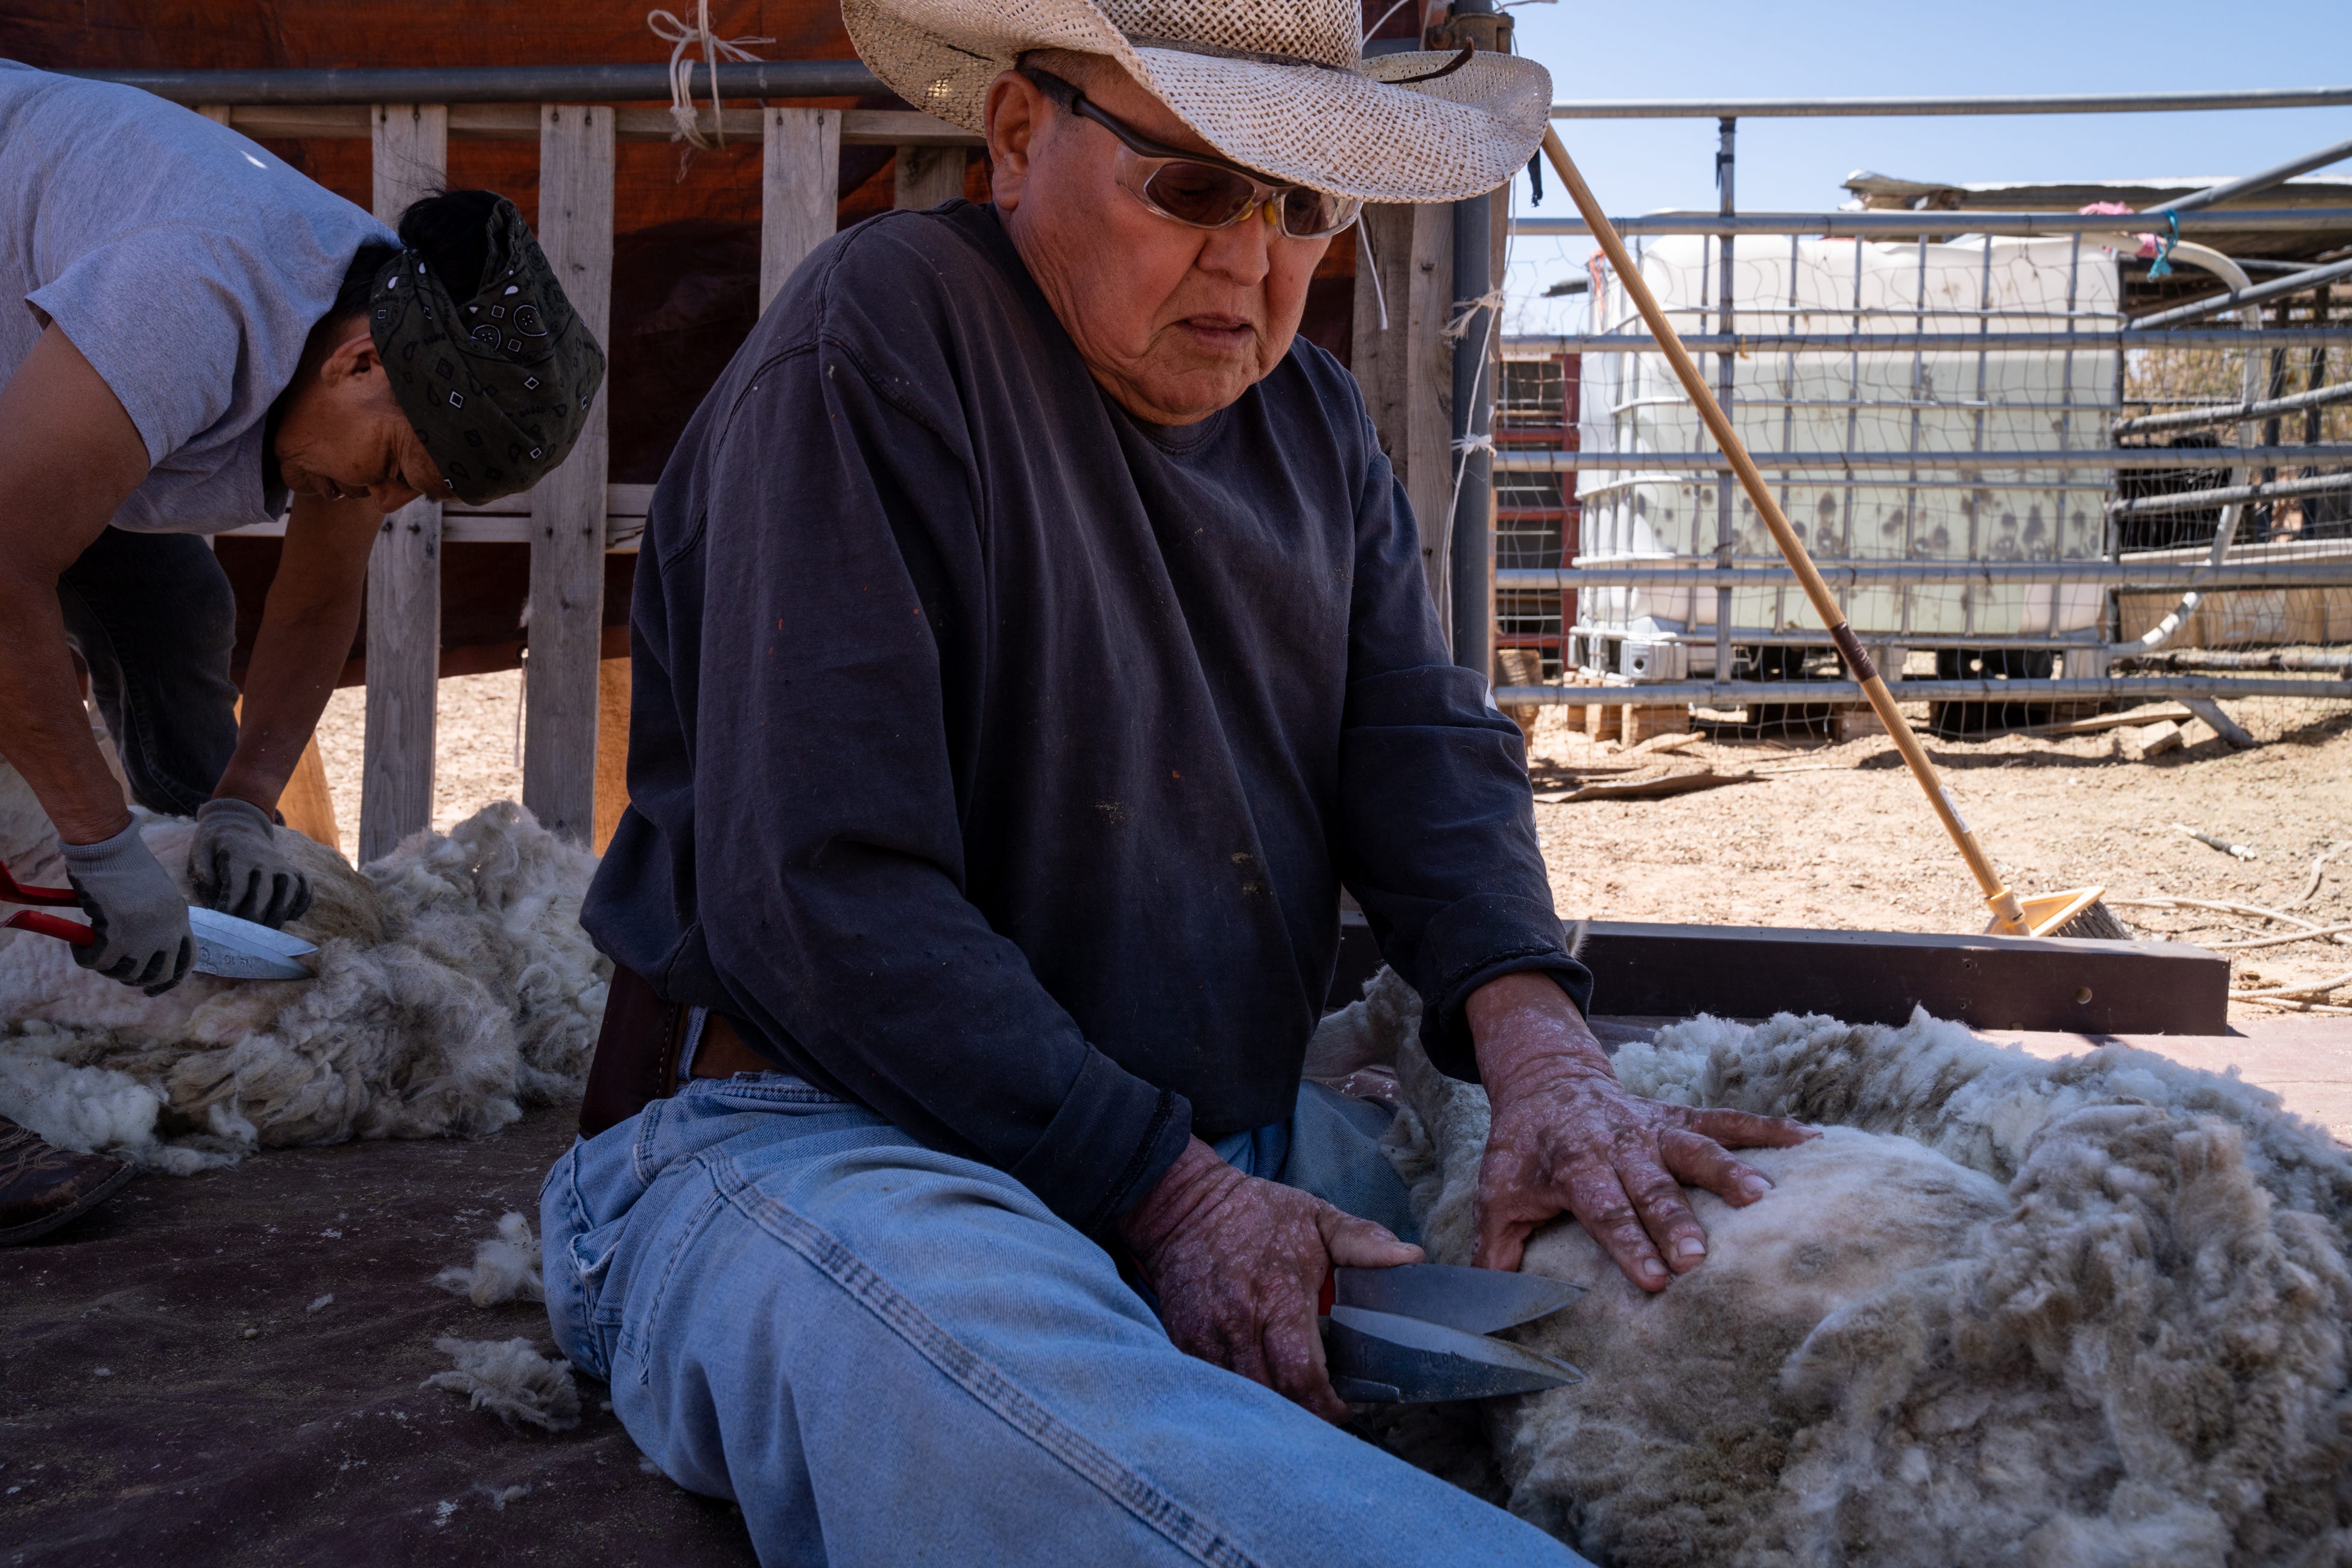 Michael and Marjorie Bigman shear sheep in their camp near Coppermine on the Navajo Nation on May 24, 2022. The Bigman's haul water from Pageevery other day, for their sheep, goats, cattle and horses.